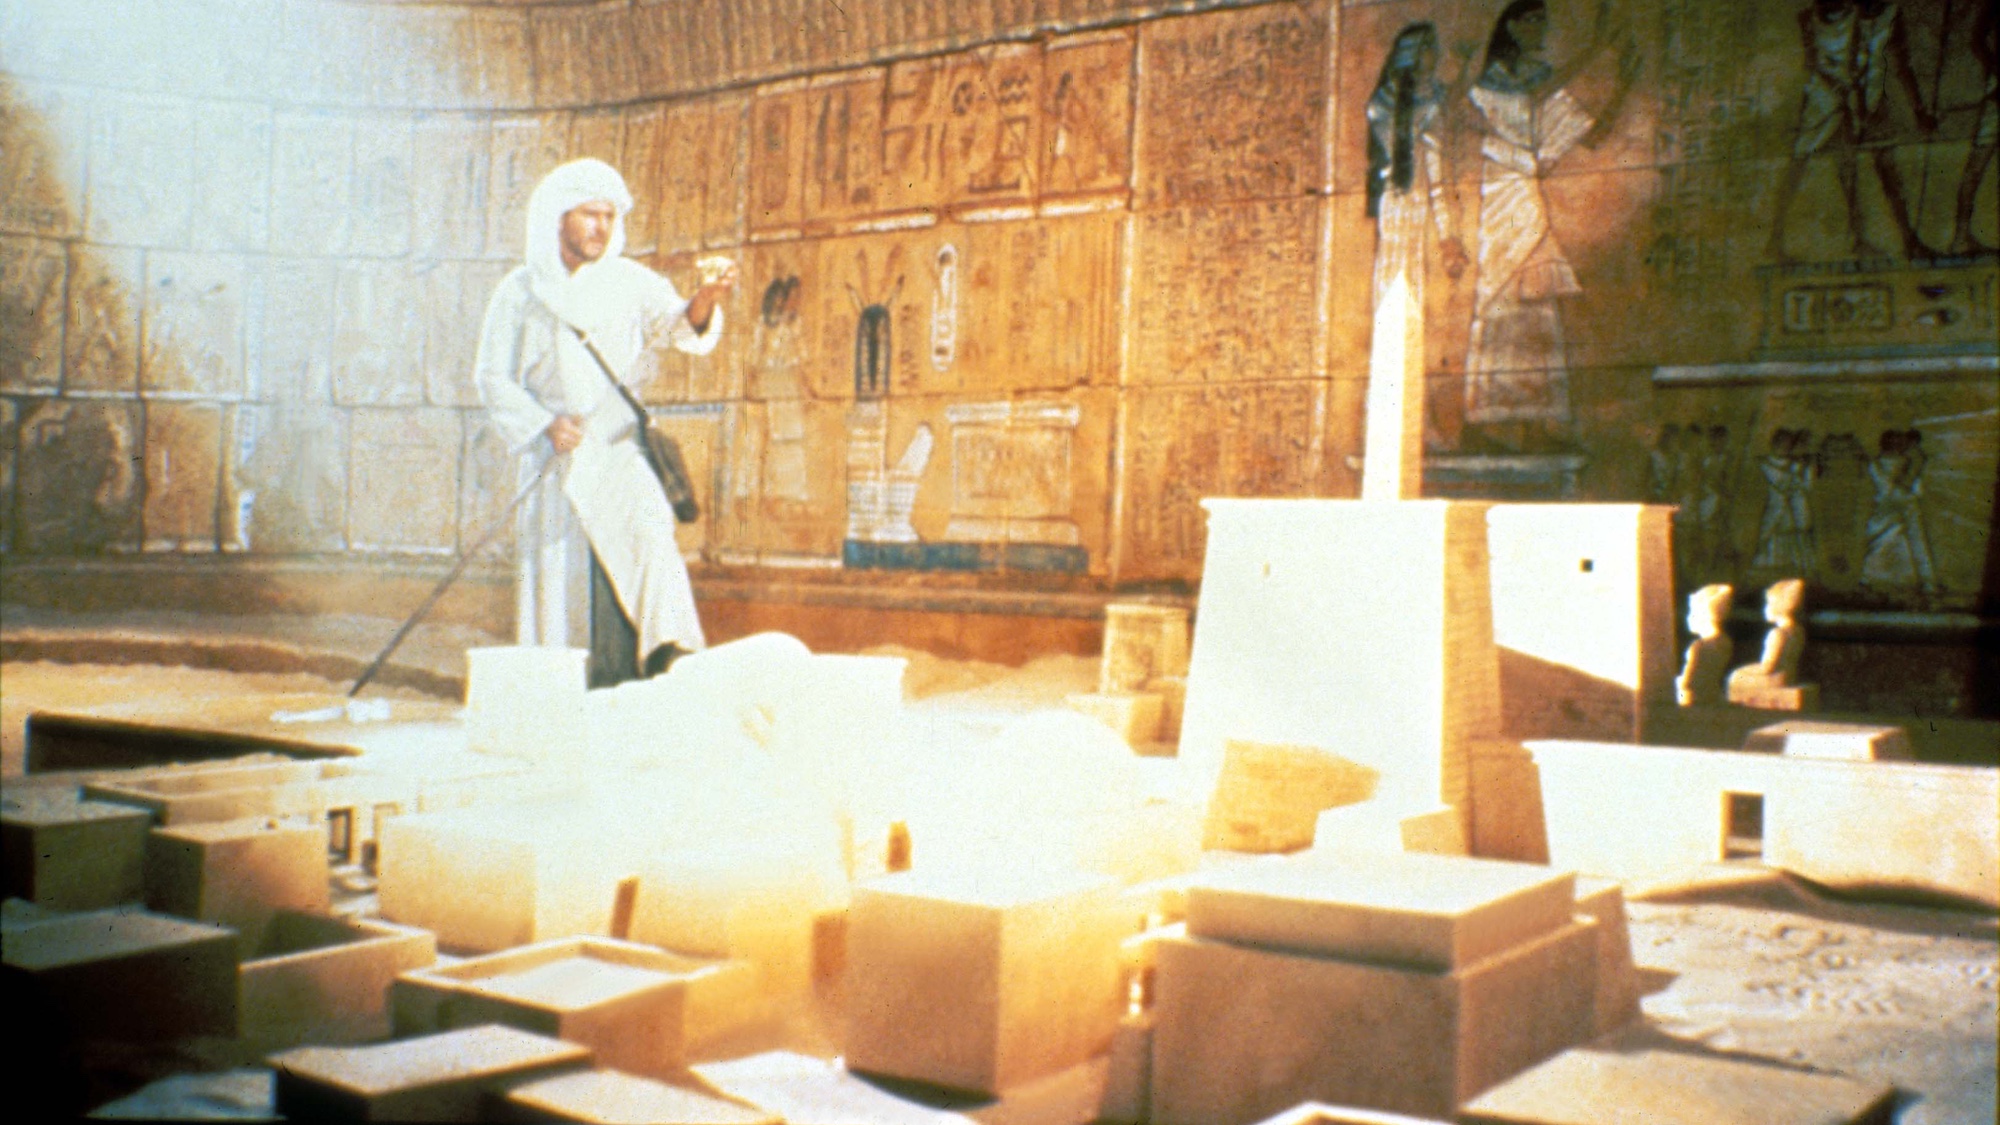 Indiana Jones in the map room from Raiders of the Lost Ark